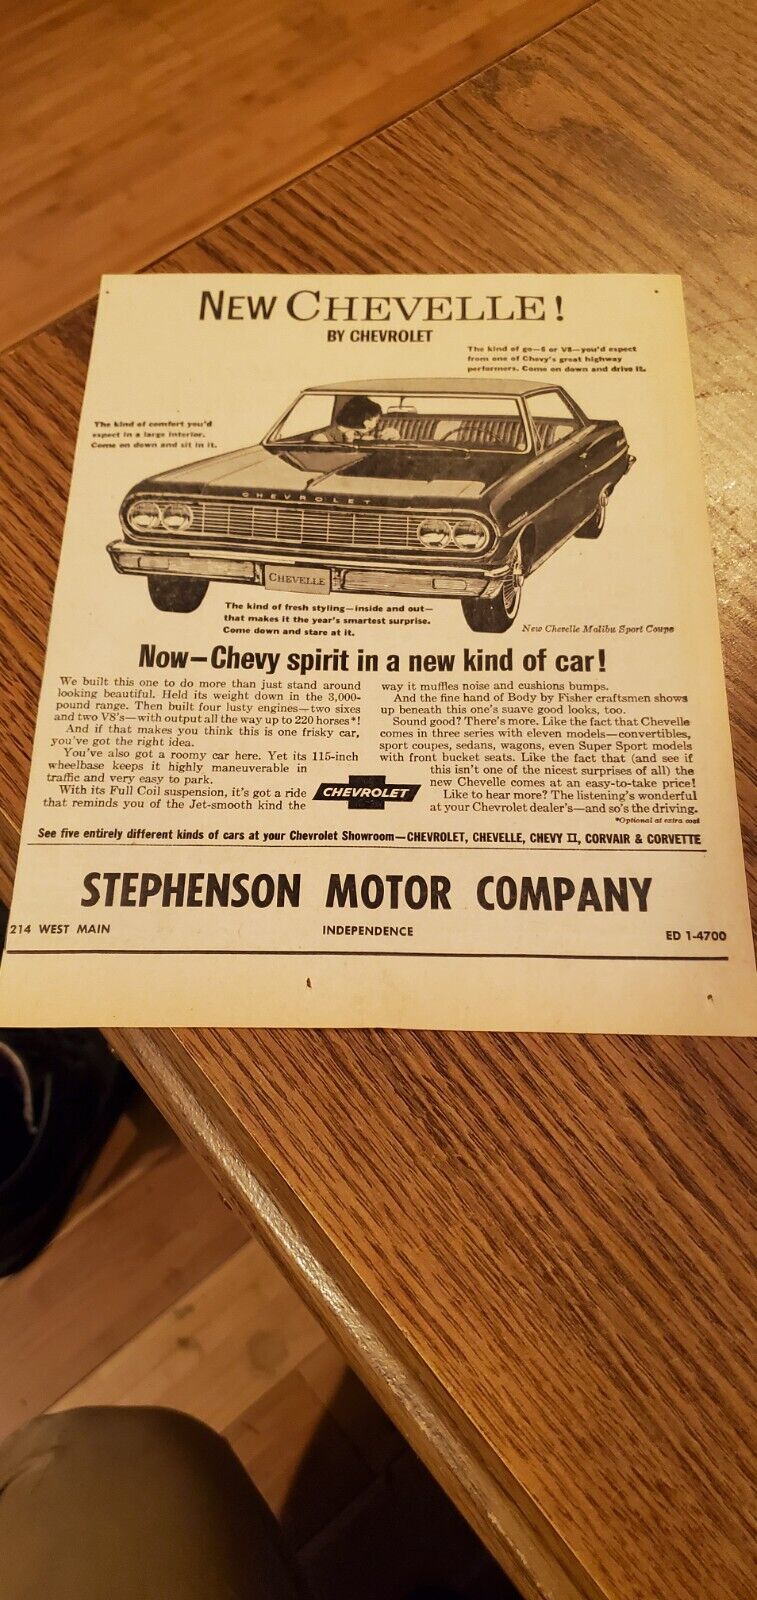 1964 Chevy Chevelle/new Chevelle! Newspaper Ad